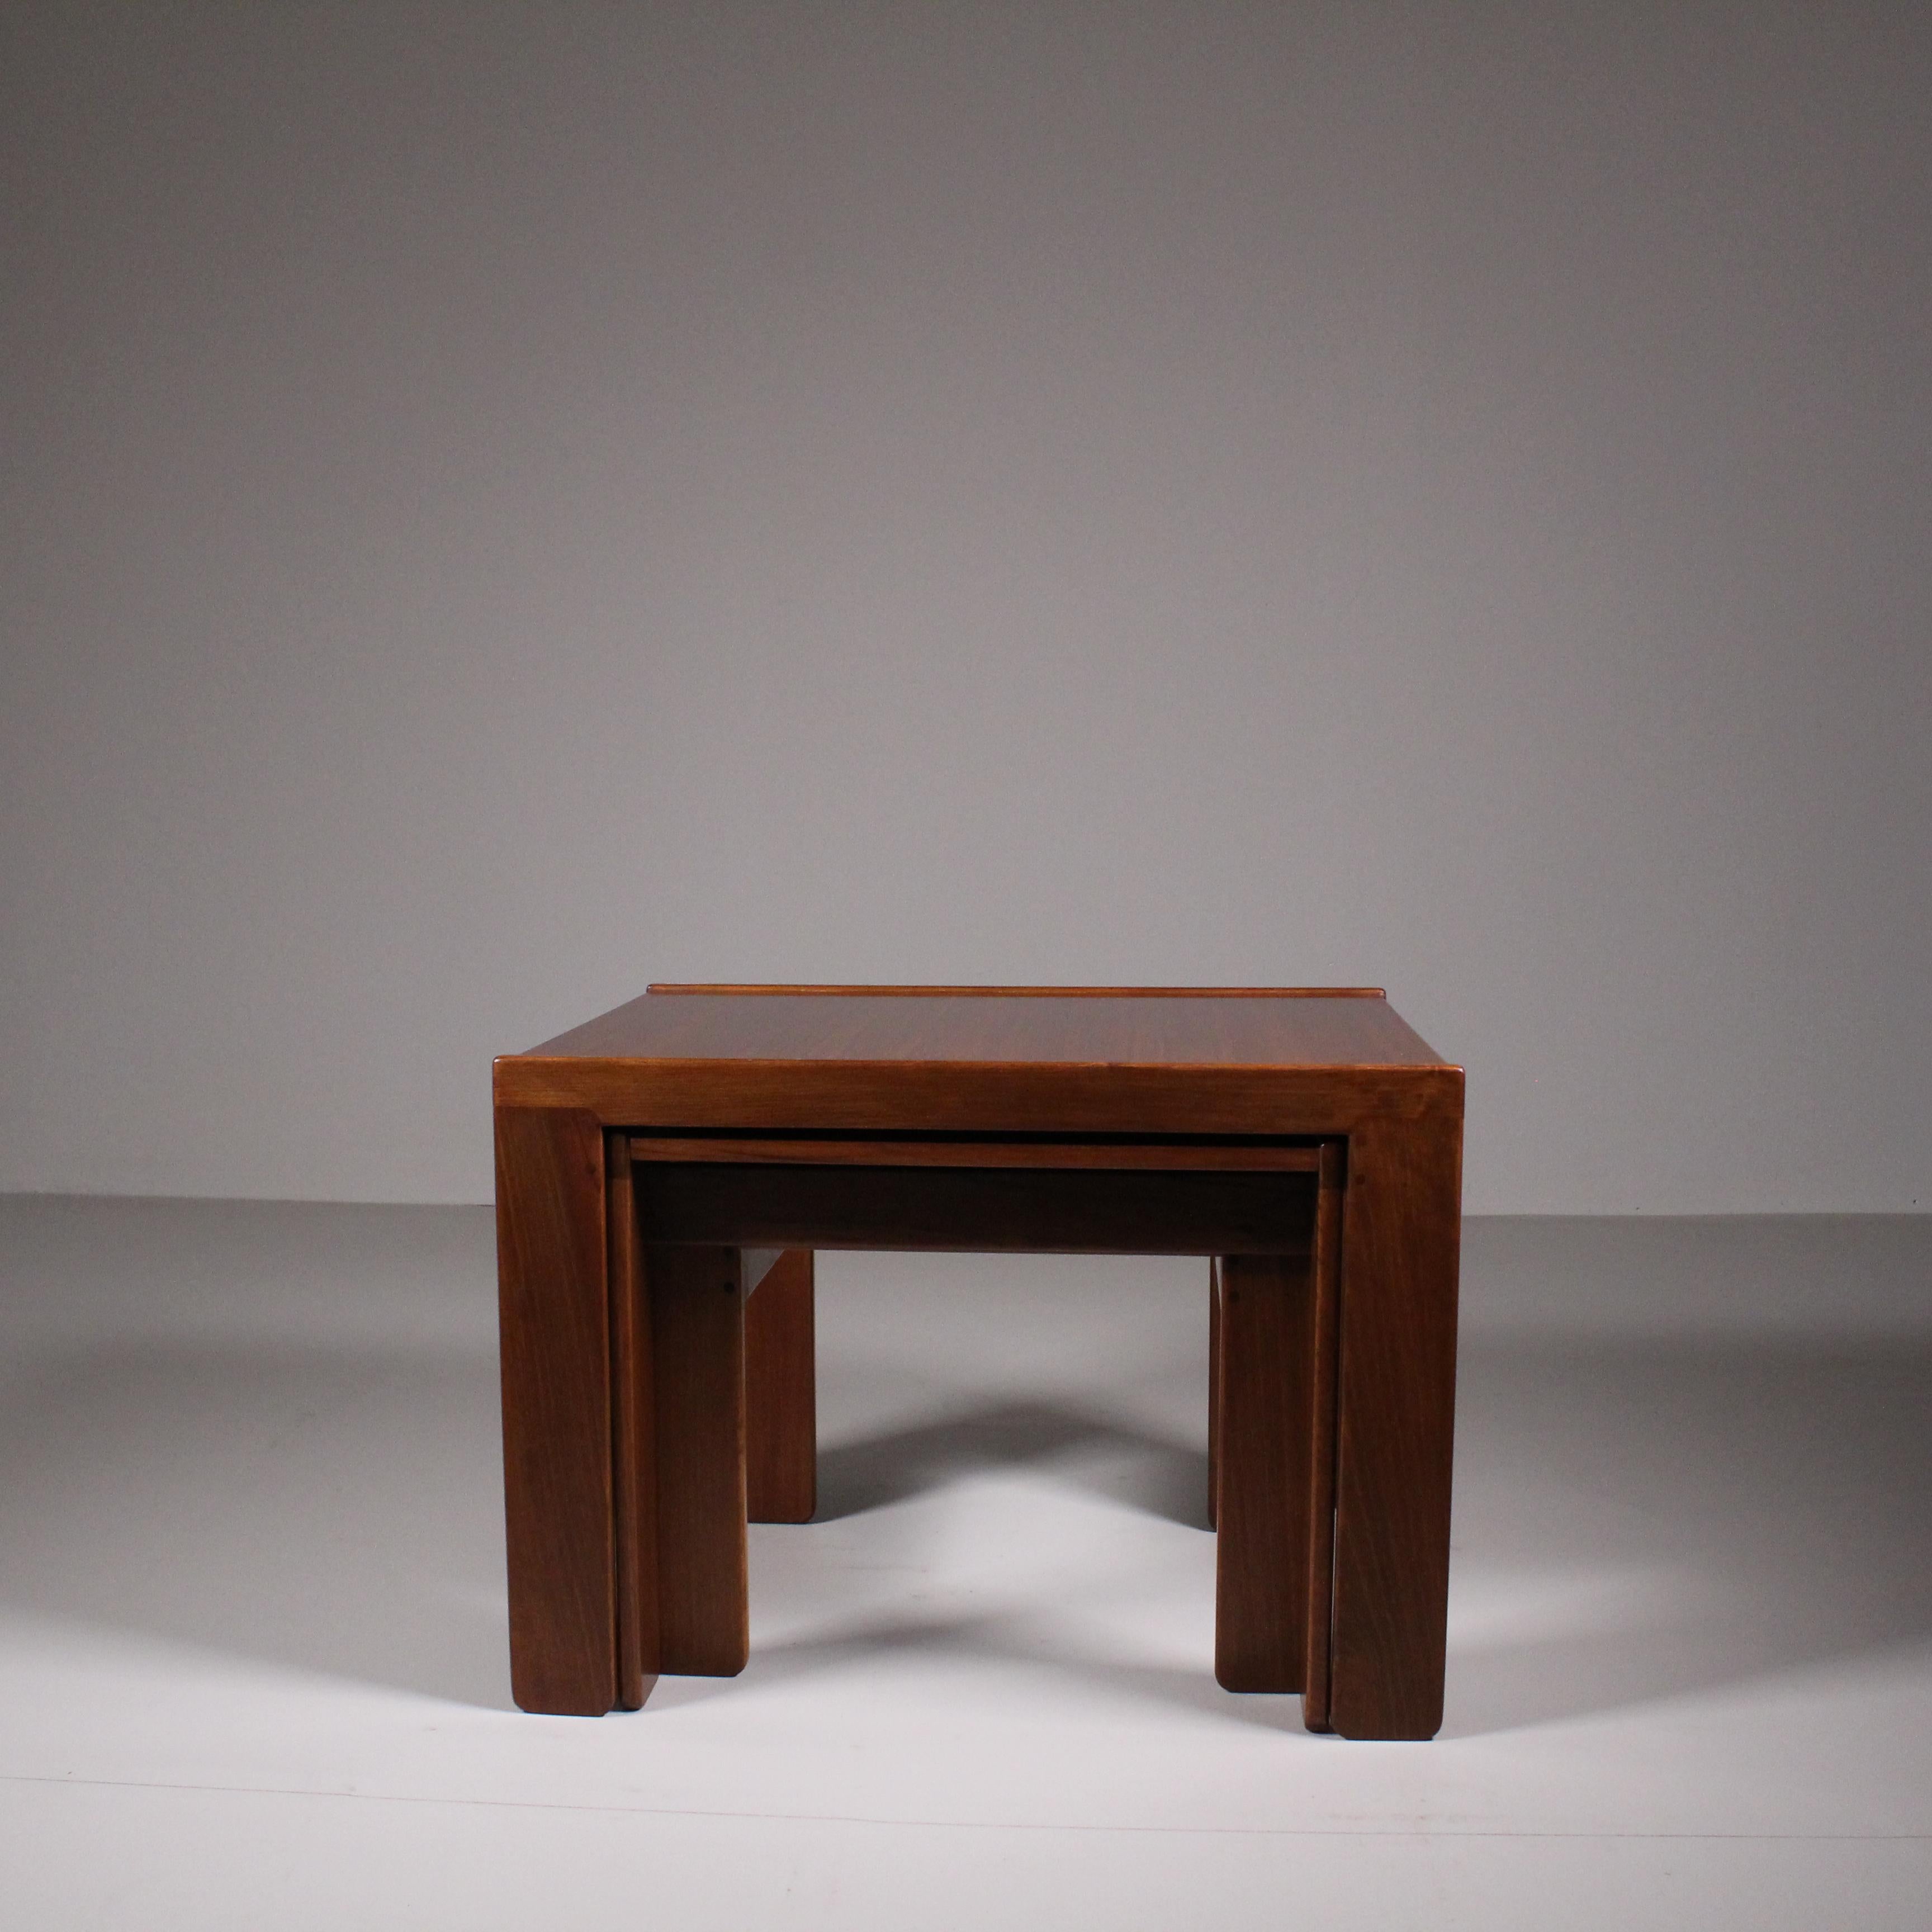 Small tables model 777, Afra and Tobia Scarpa, 1965 Circa For Sale 4